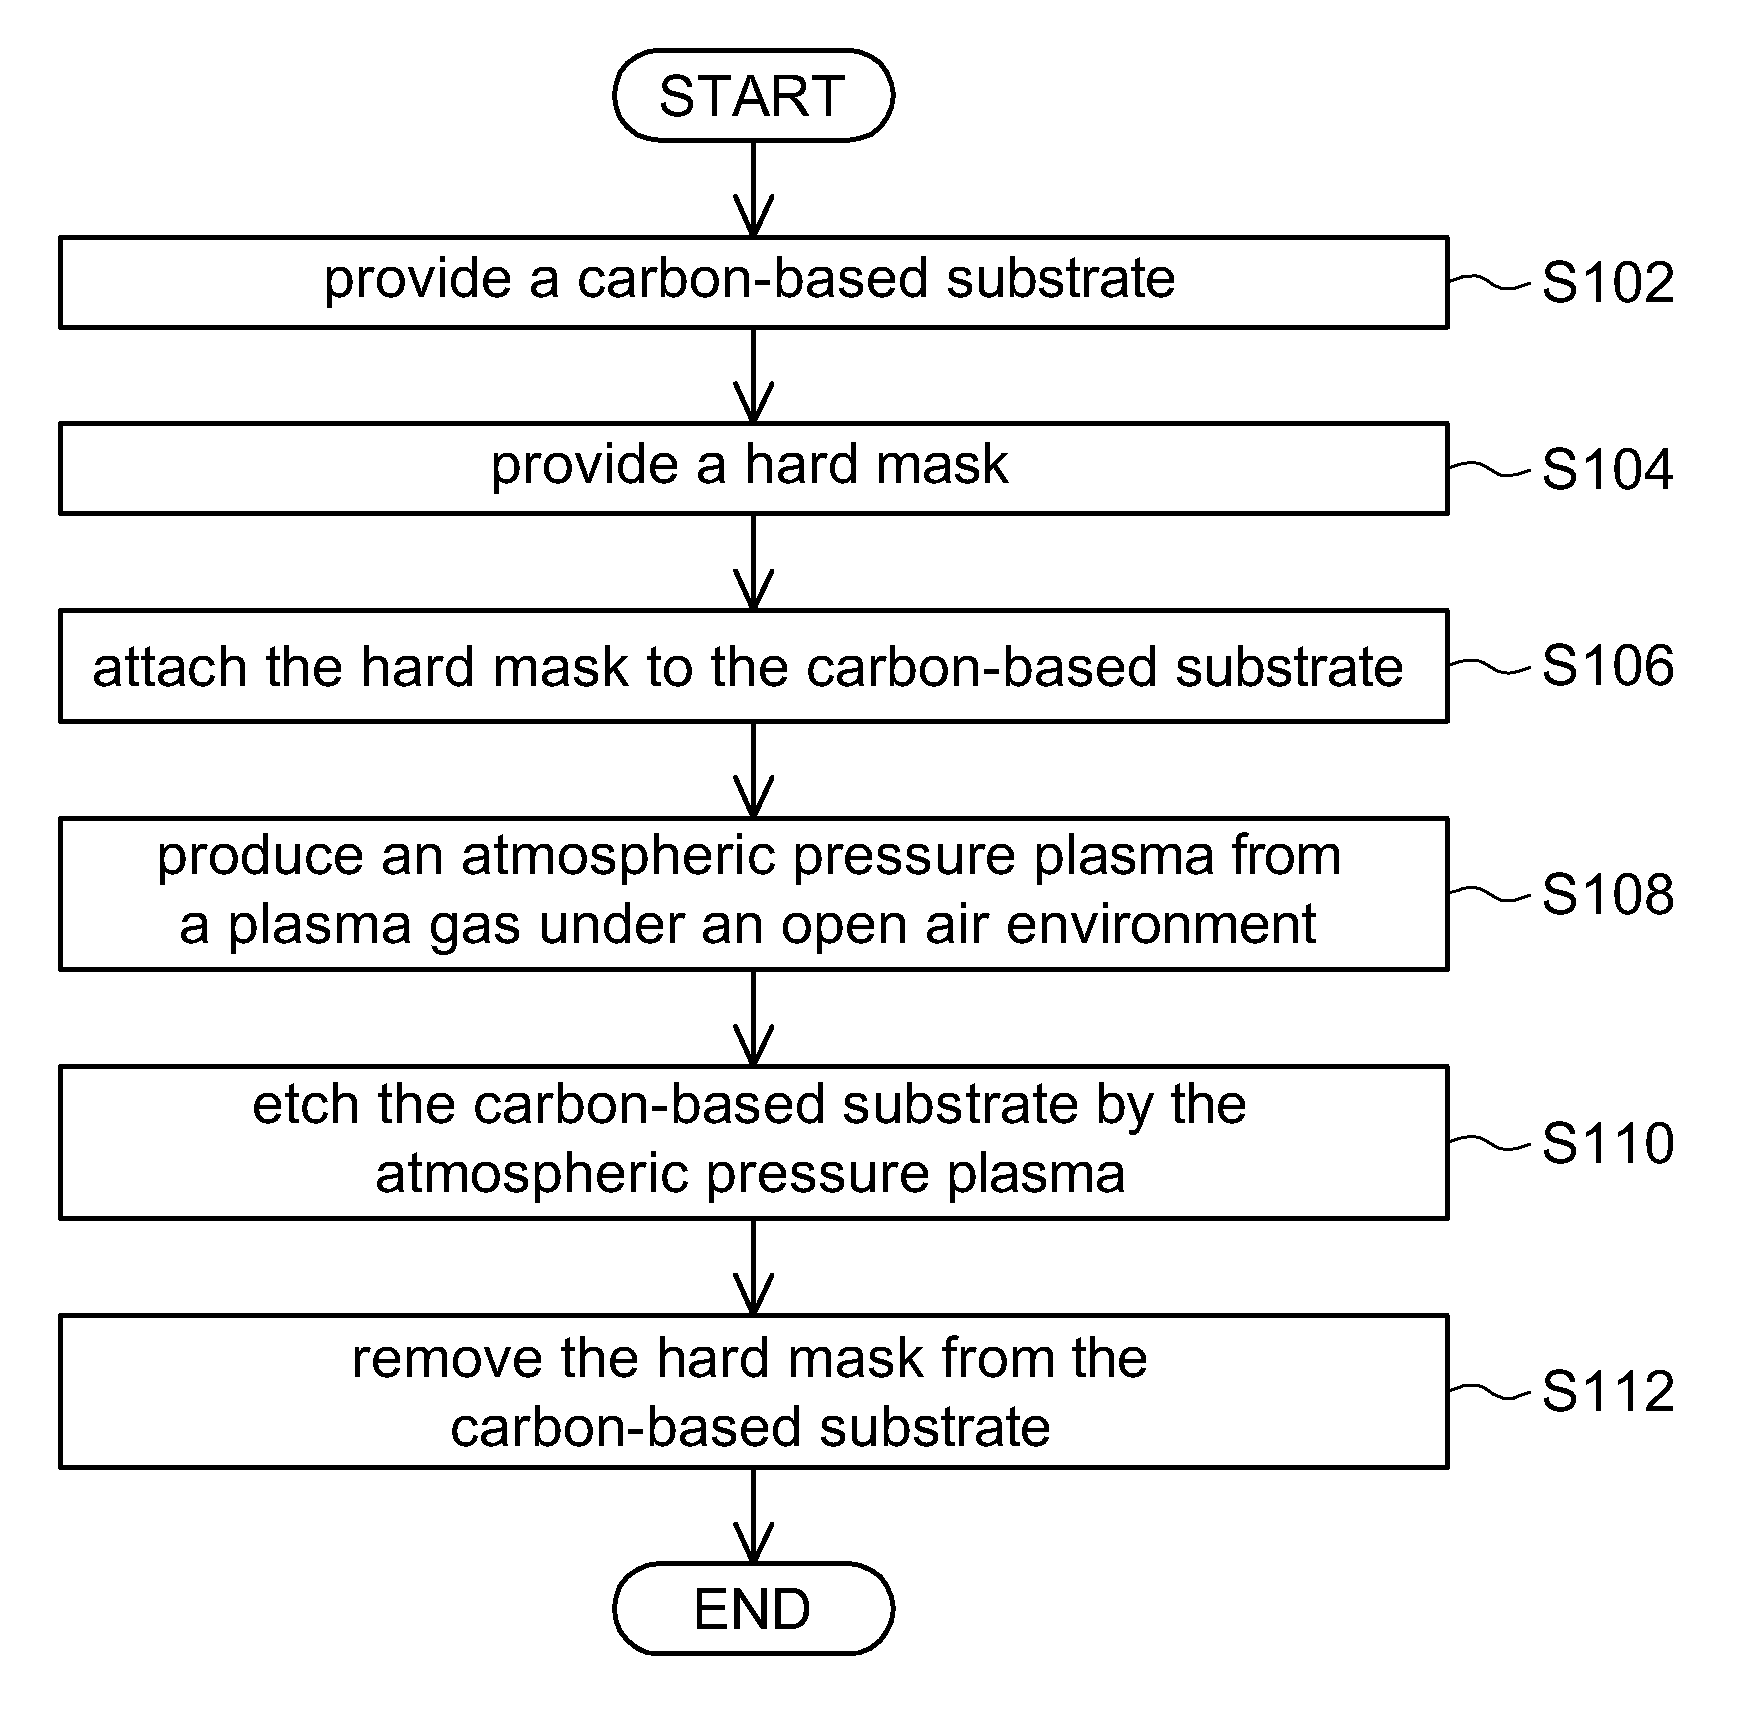 Patterning Method for Carbon-Based Substrate